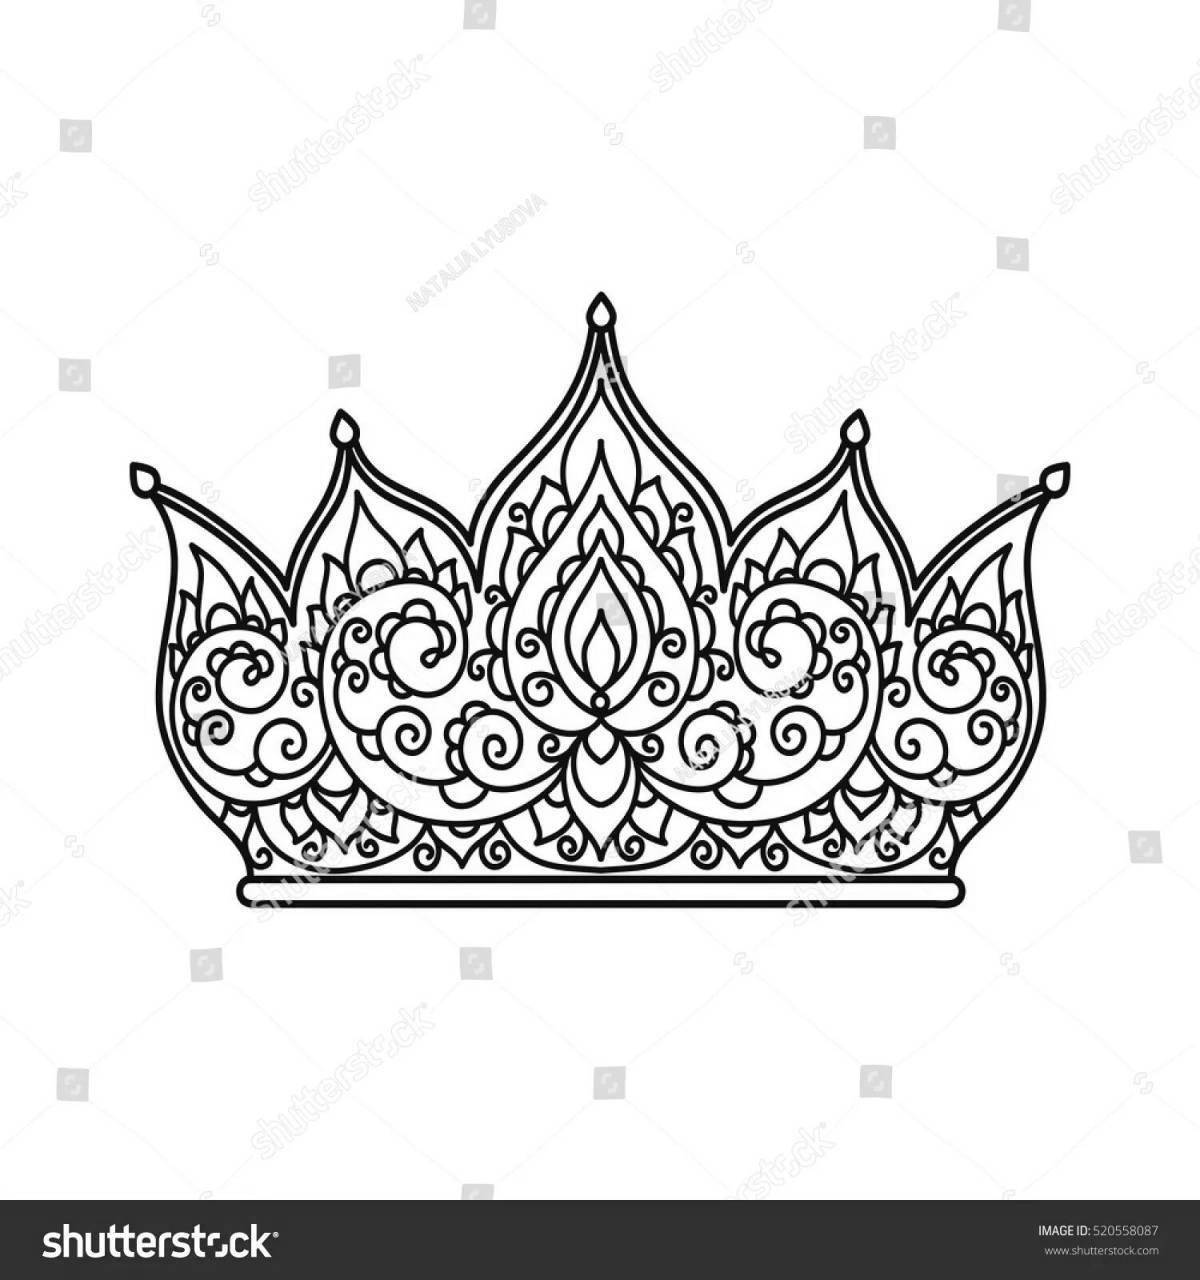 Radiant coloring page crown for girls